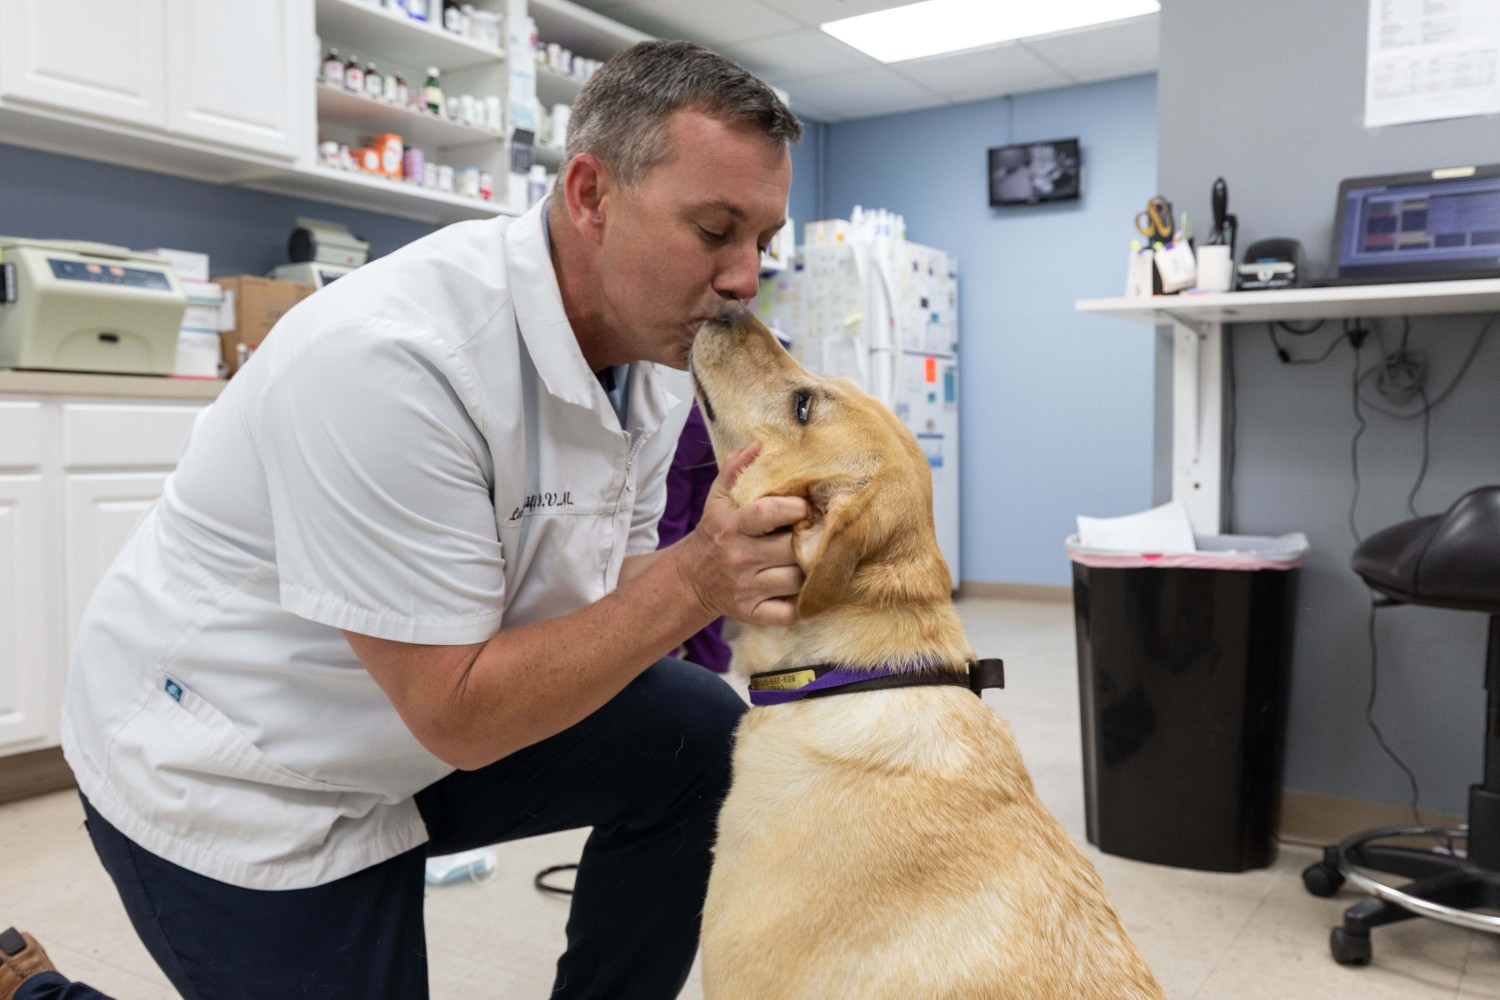 Dr. getting Kisses from dog